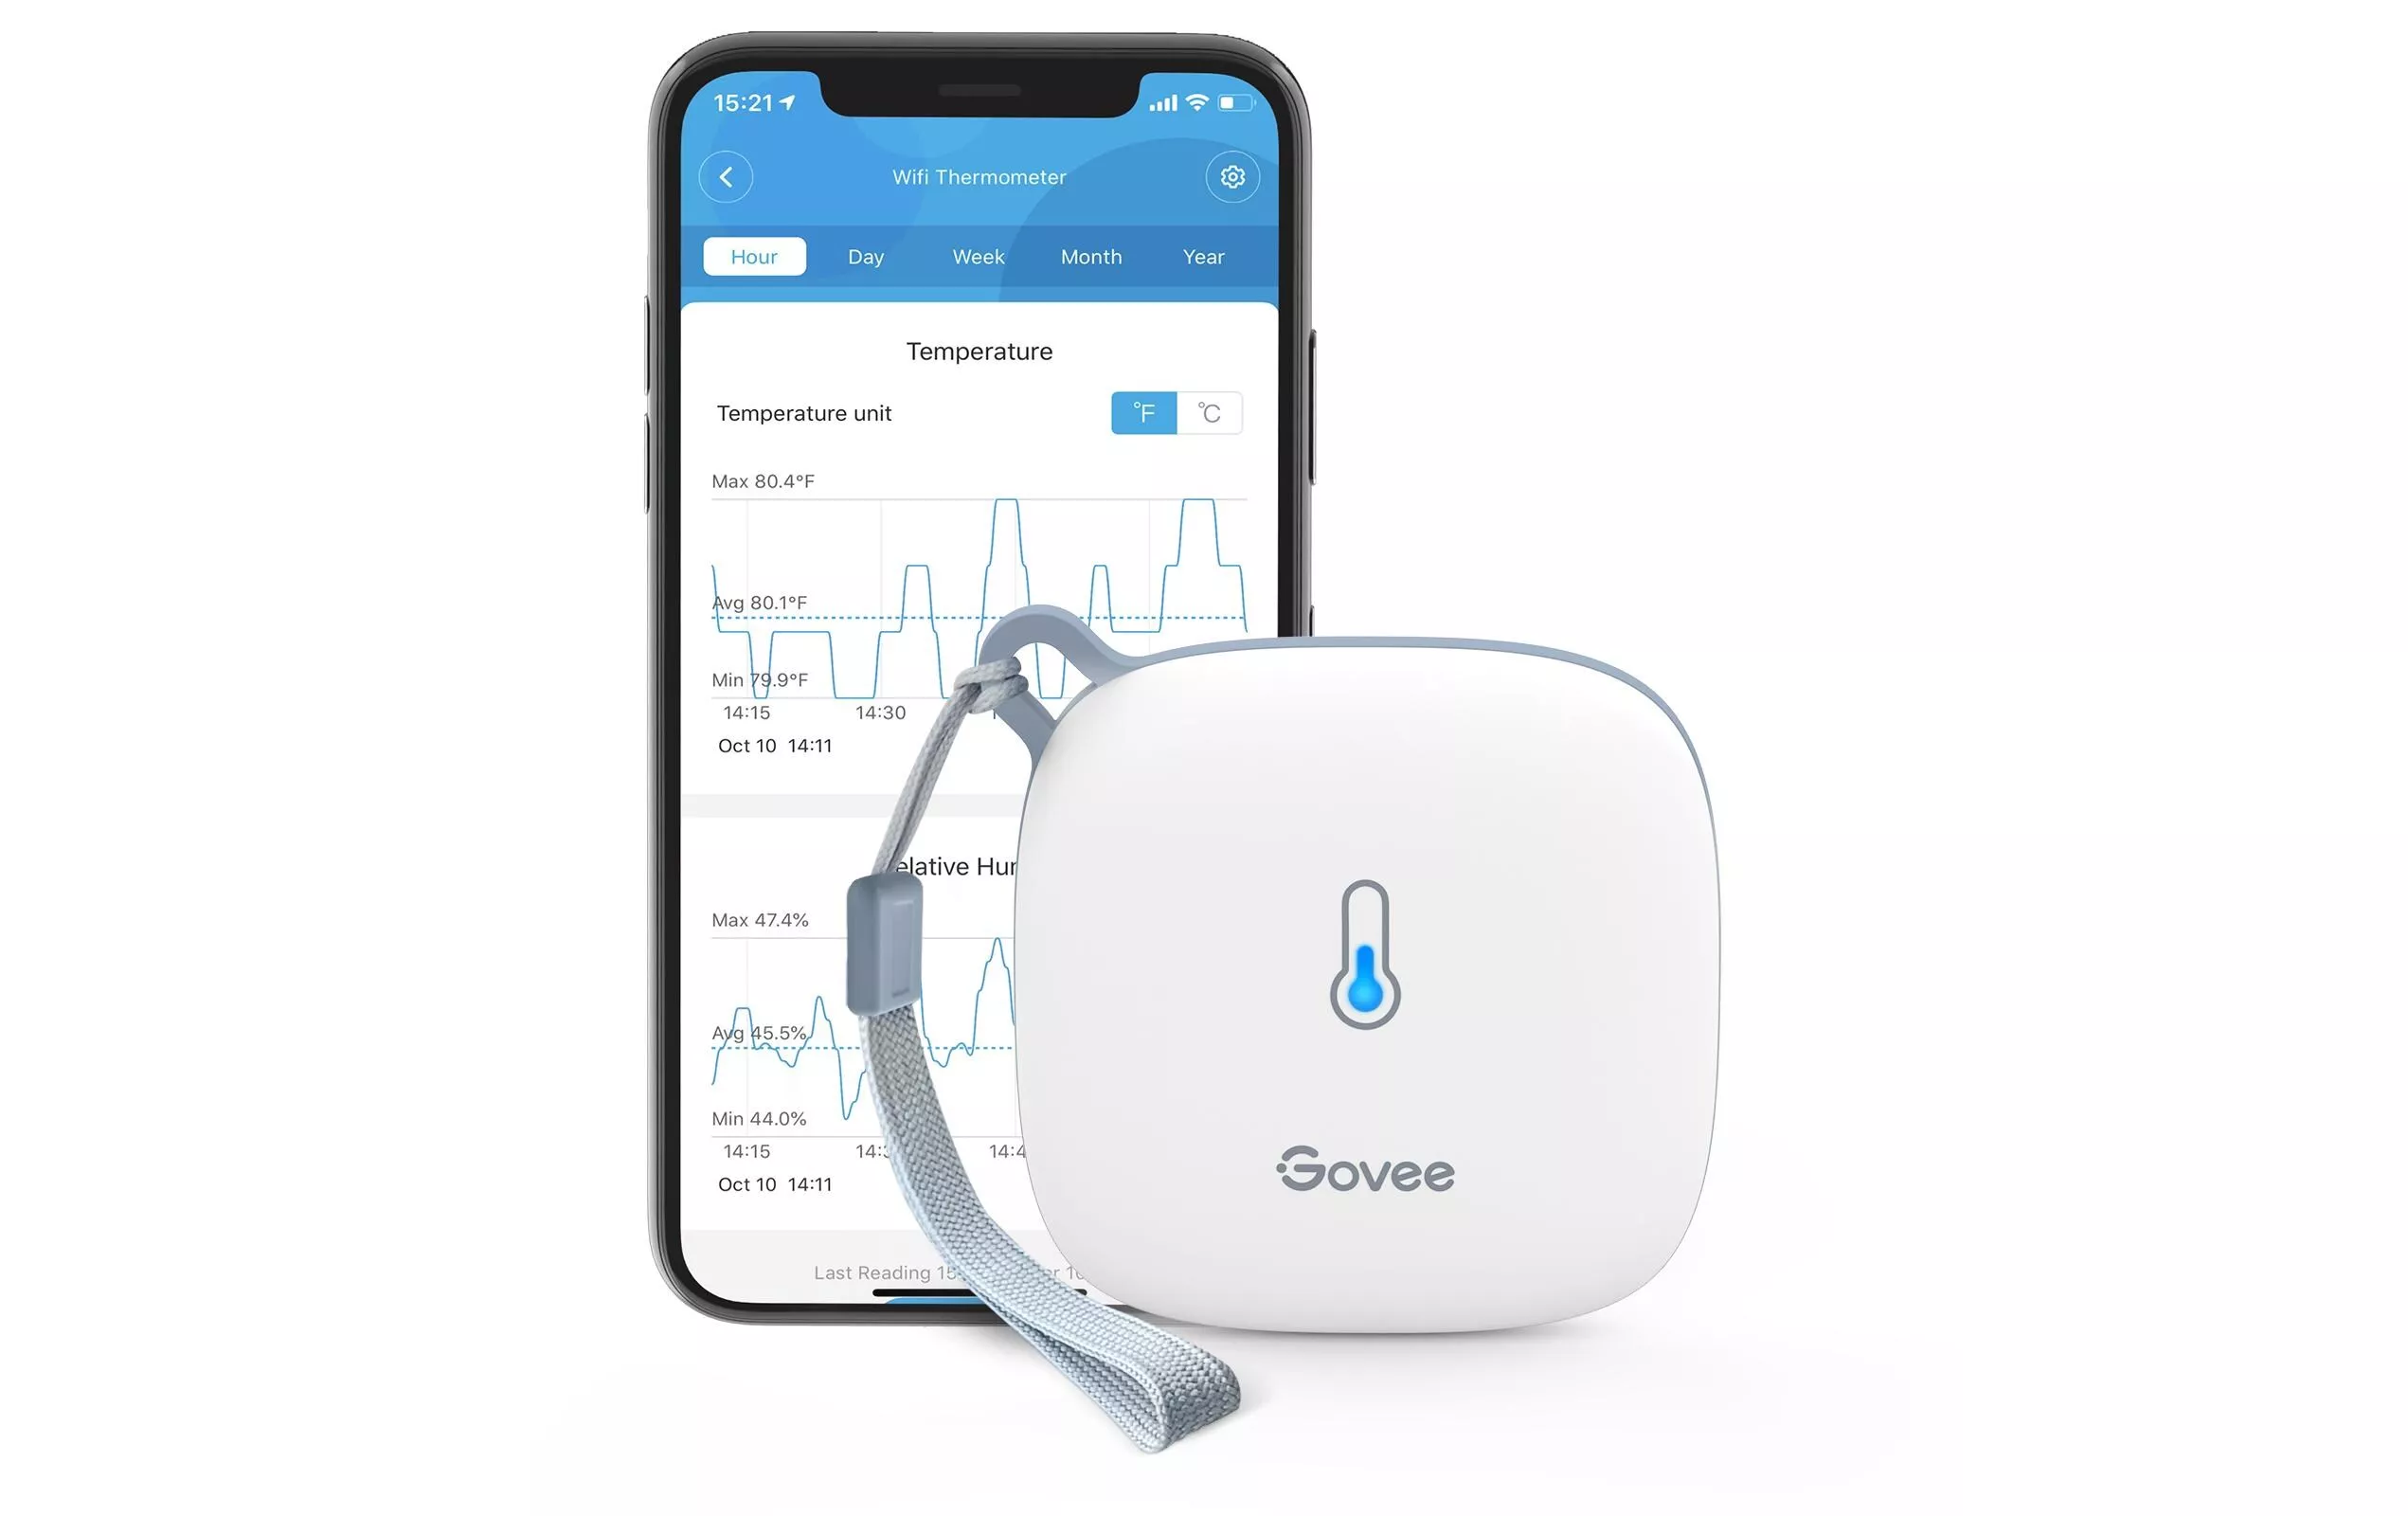 Govee Wetterstation WiFi Thermometer/Hygrometer